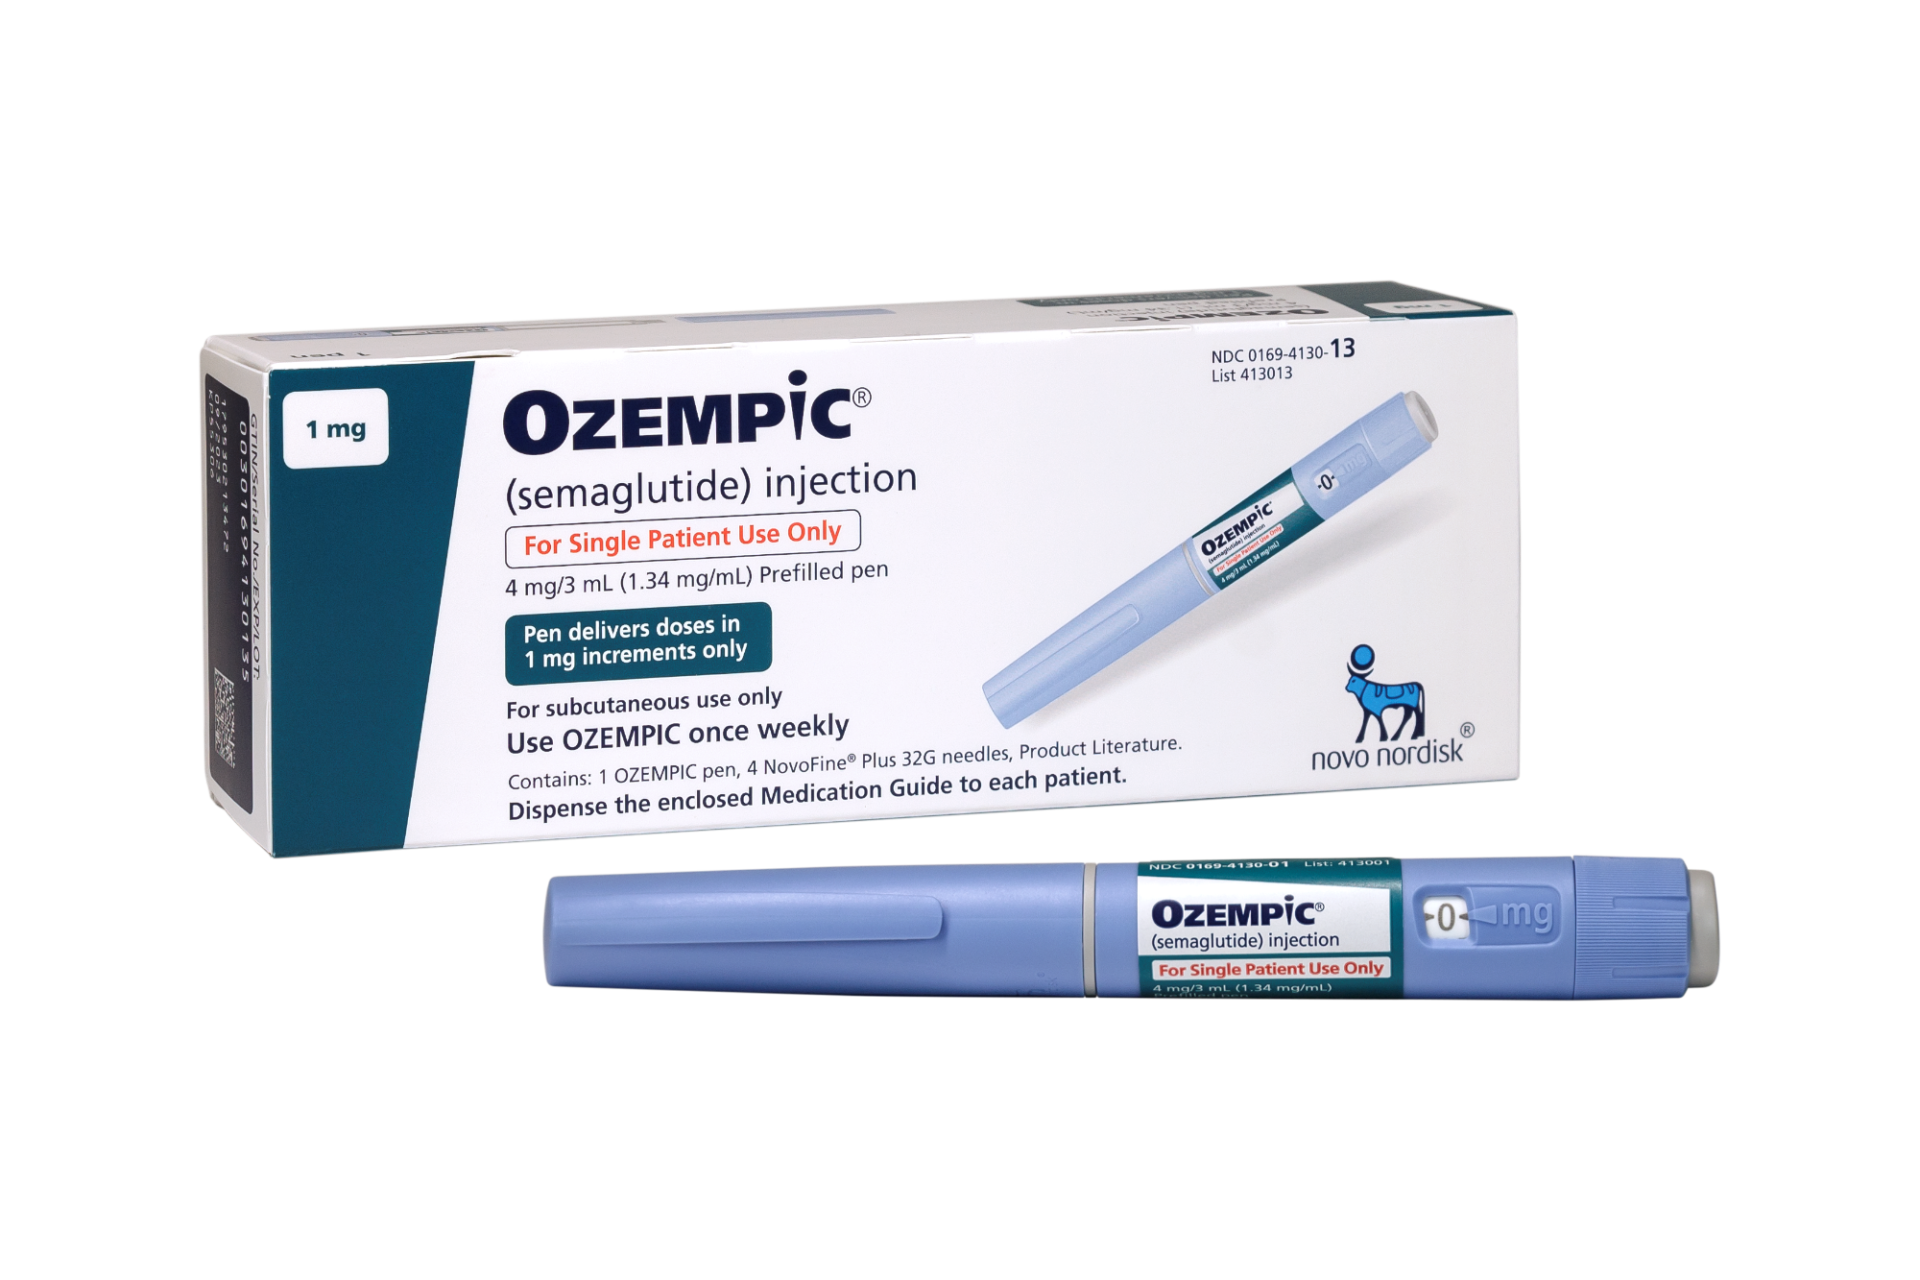 ozempic semaglutide pen injection